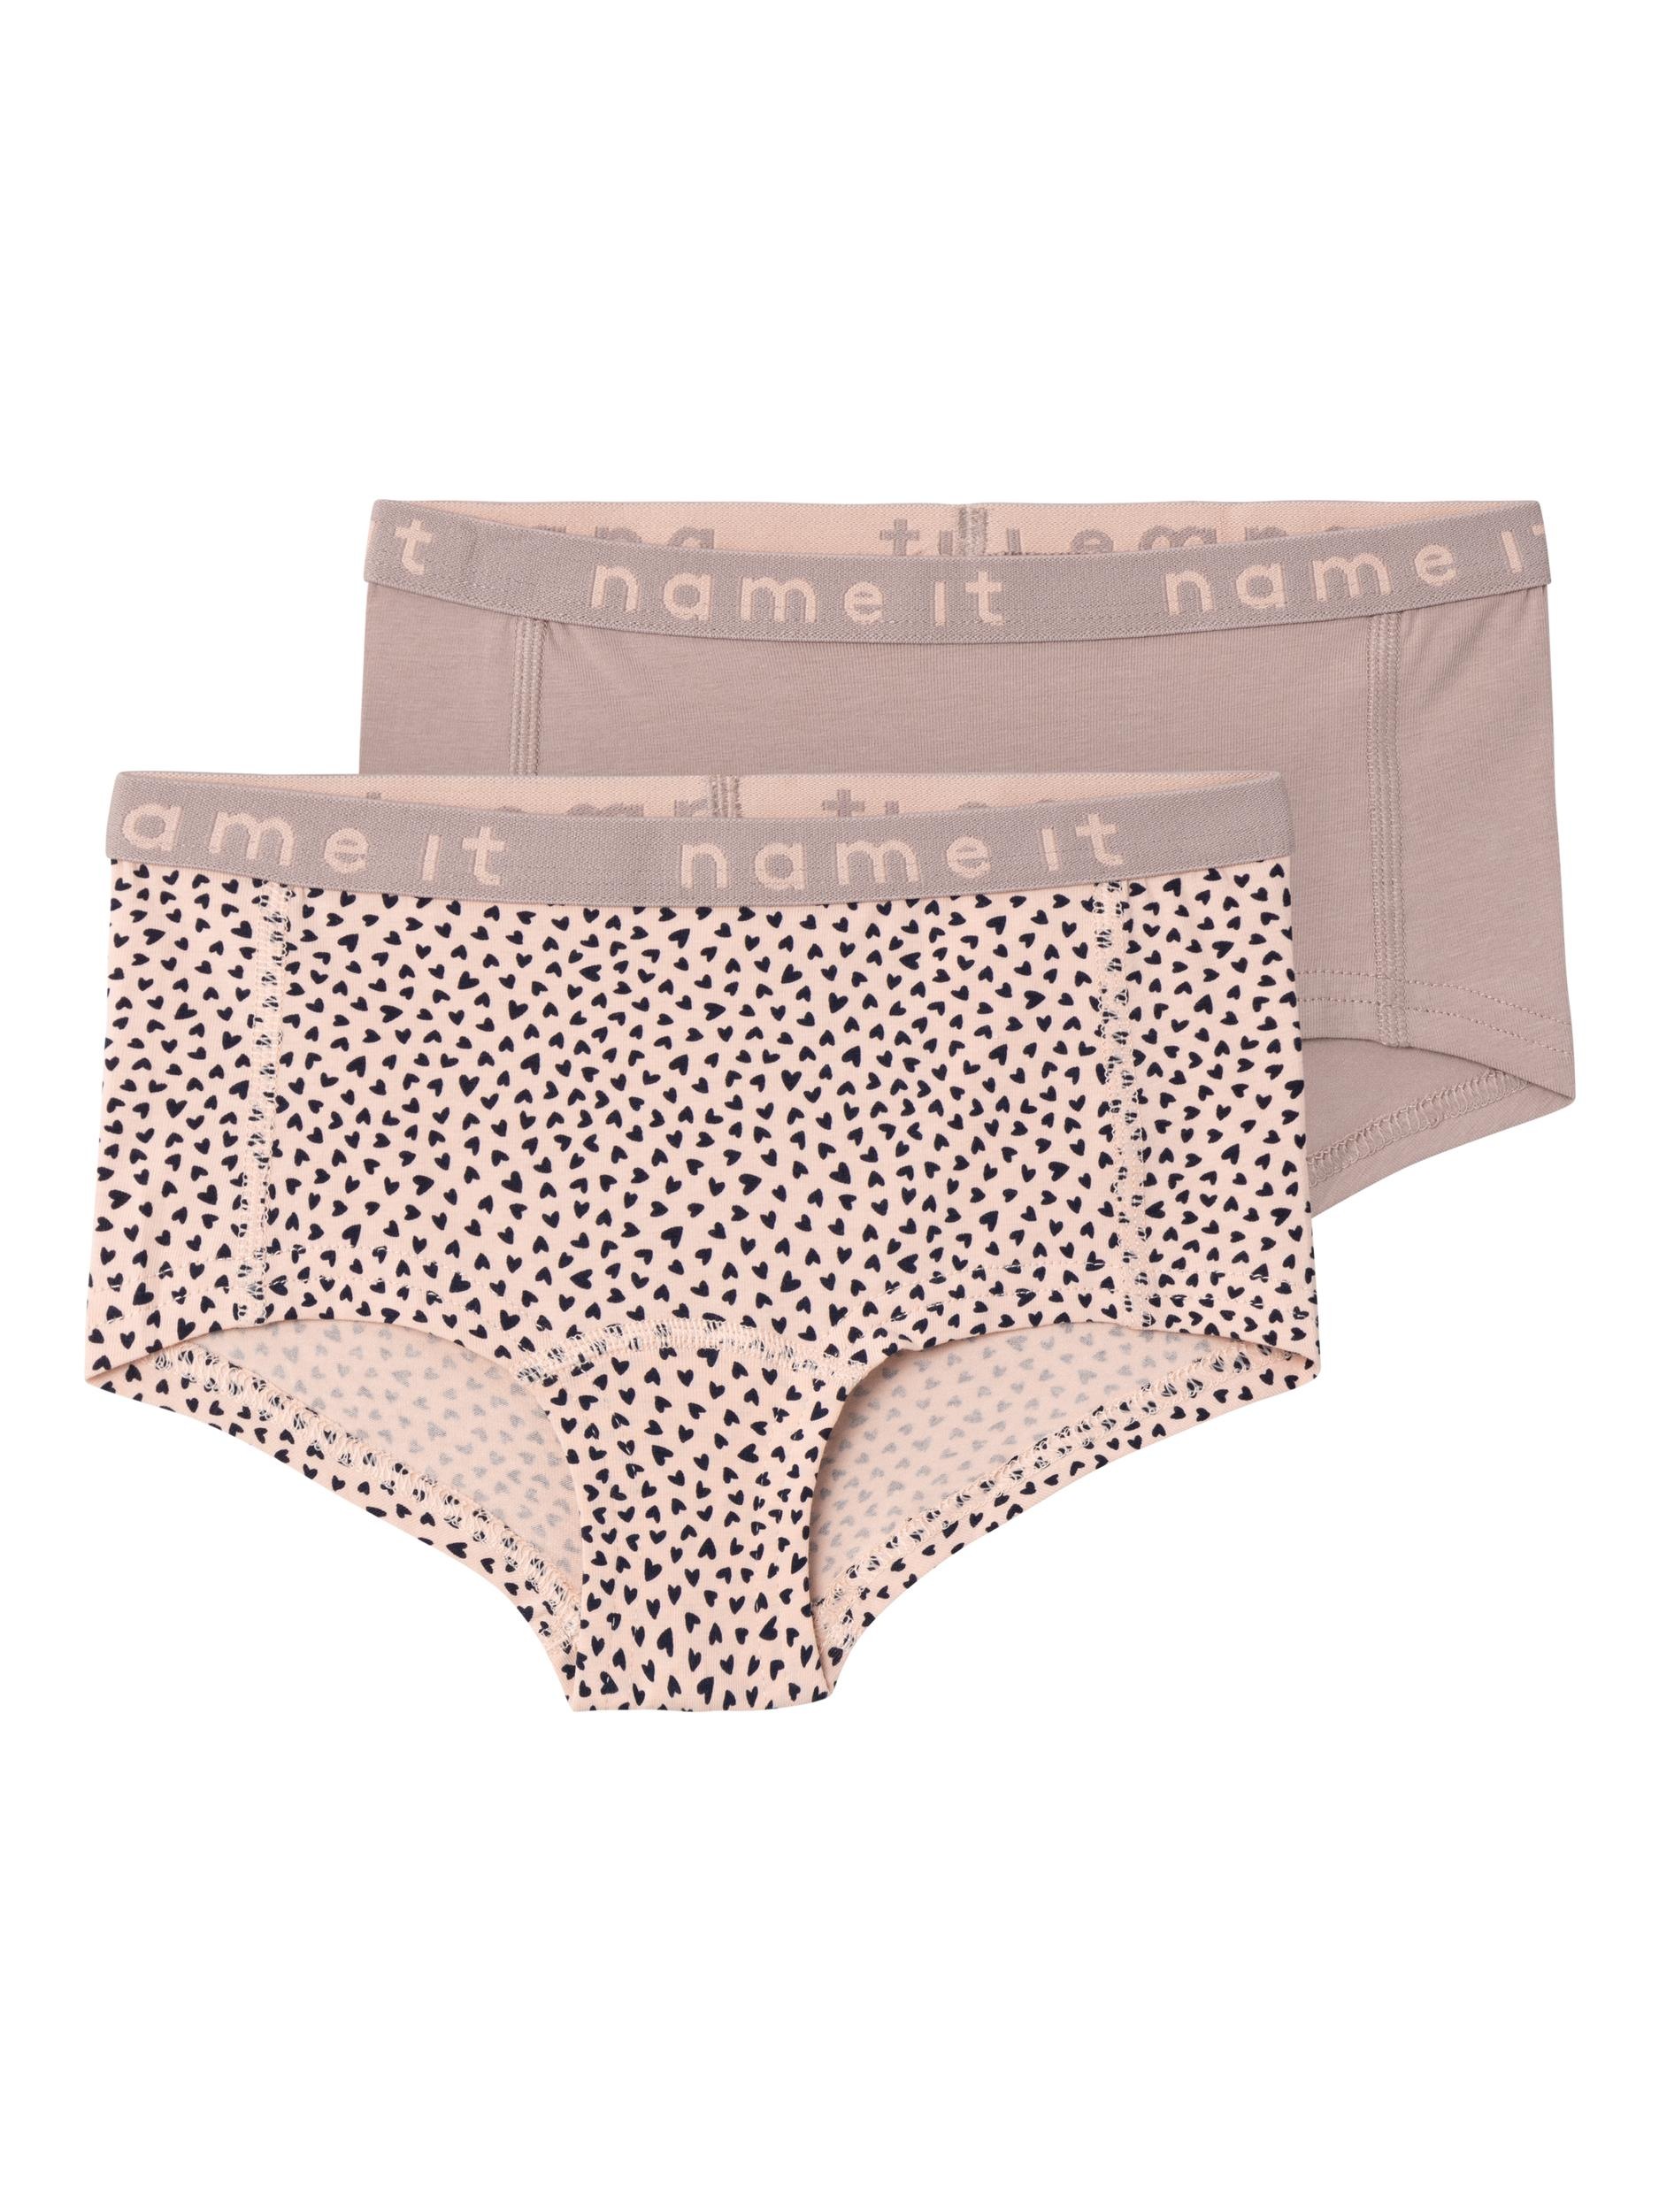 Name It Hipster SAND (Packung, NOOS«, bei Pack) EVENING OTTO HEARTS 2P St., 2 2er »NKFHIPSTER